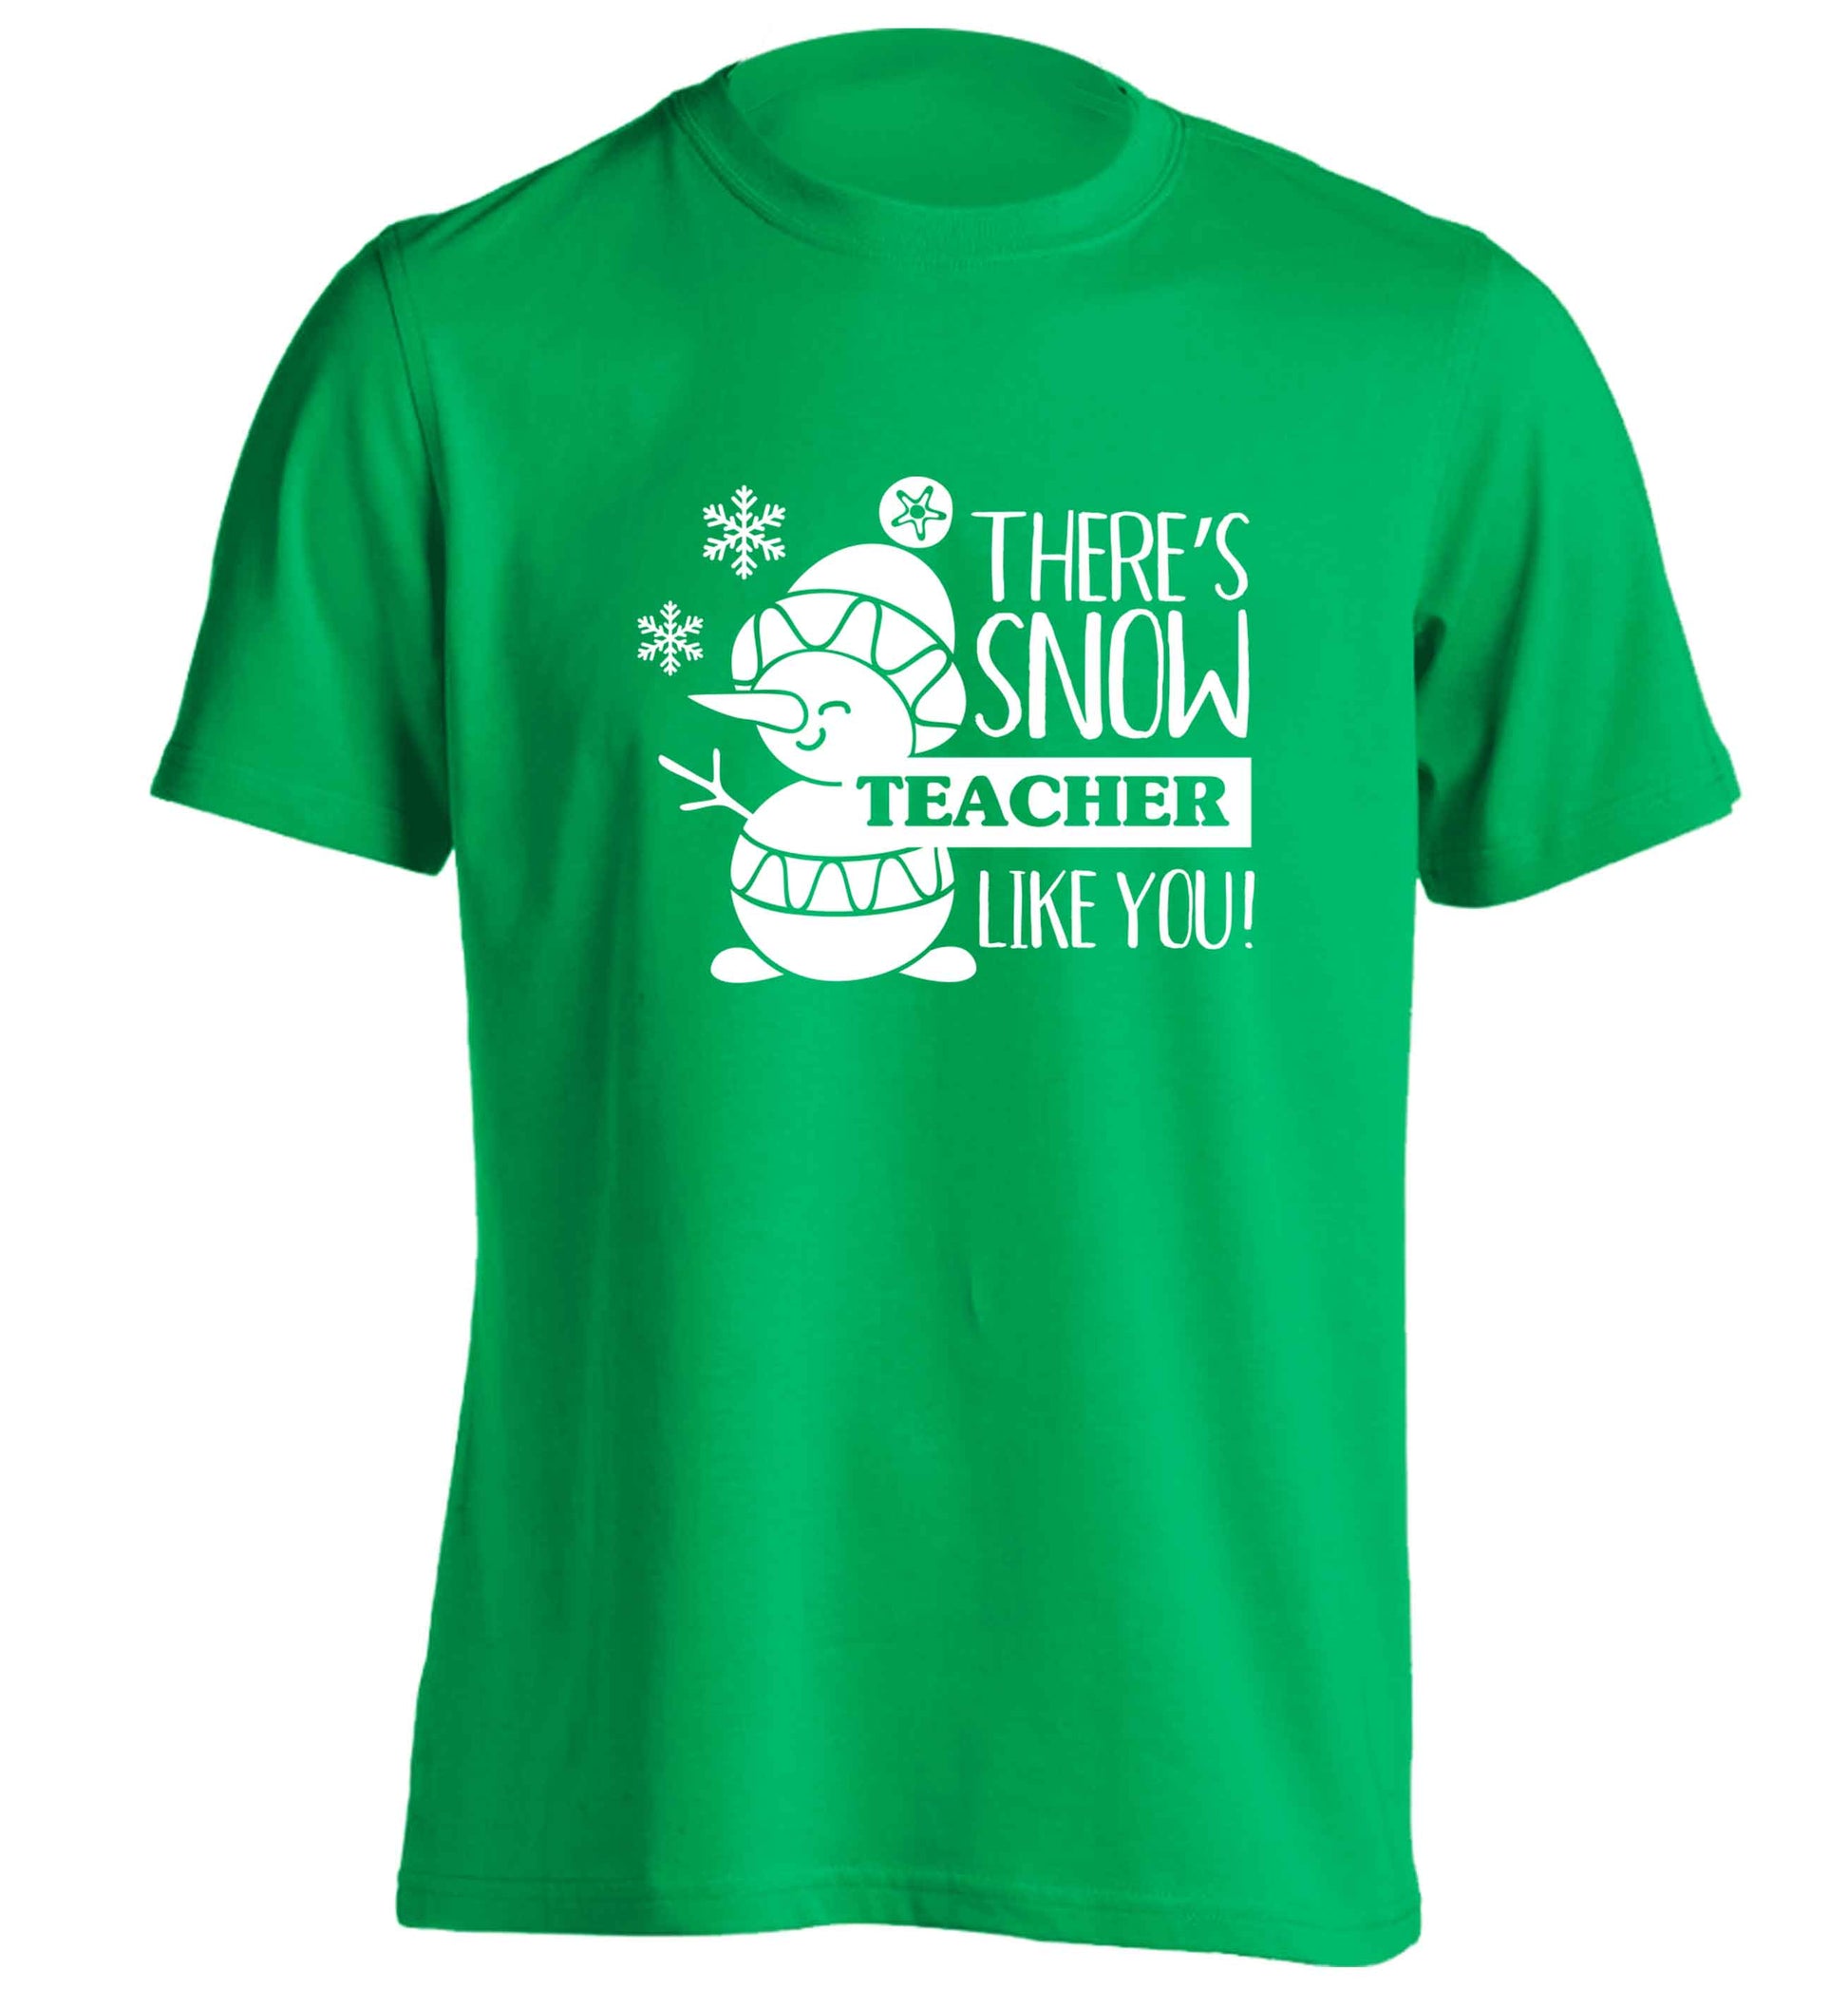 There's snow teacher like you adults unisex green Tshirt 2XL